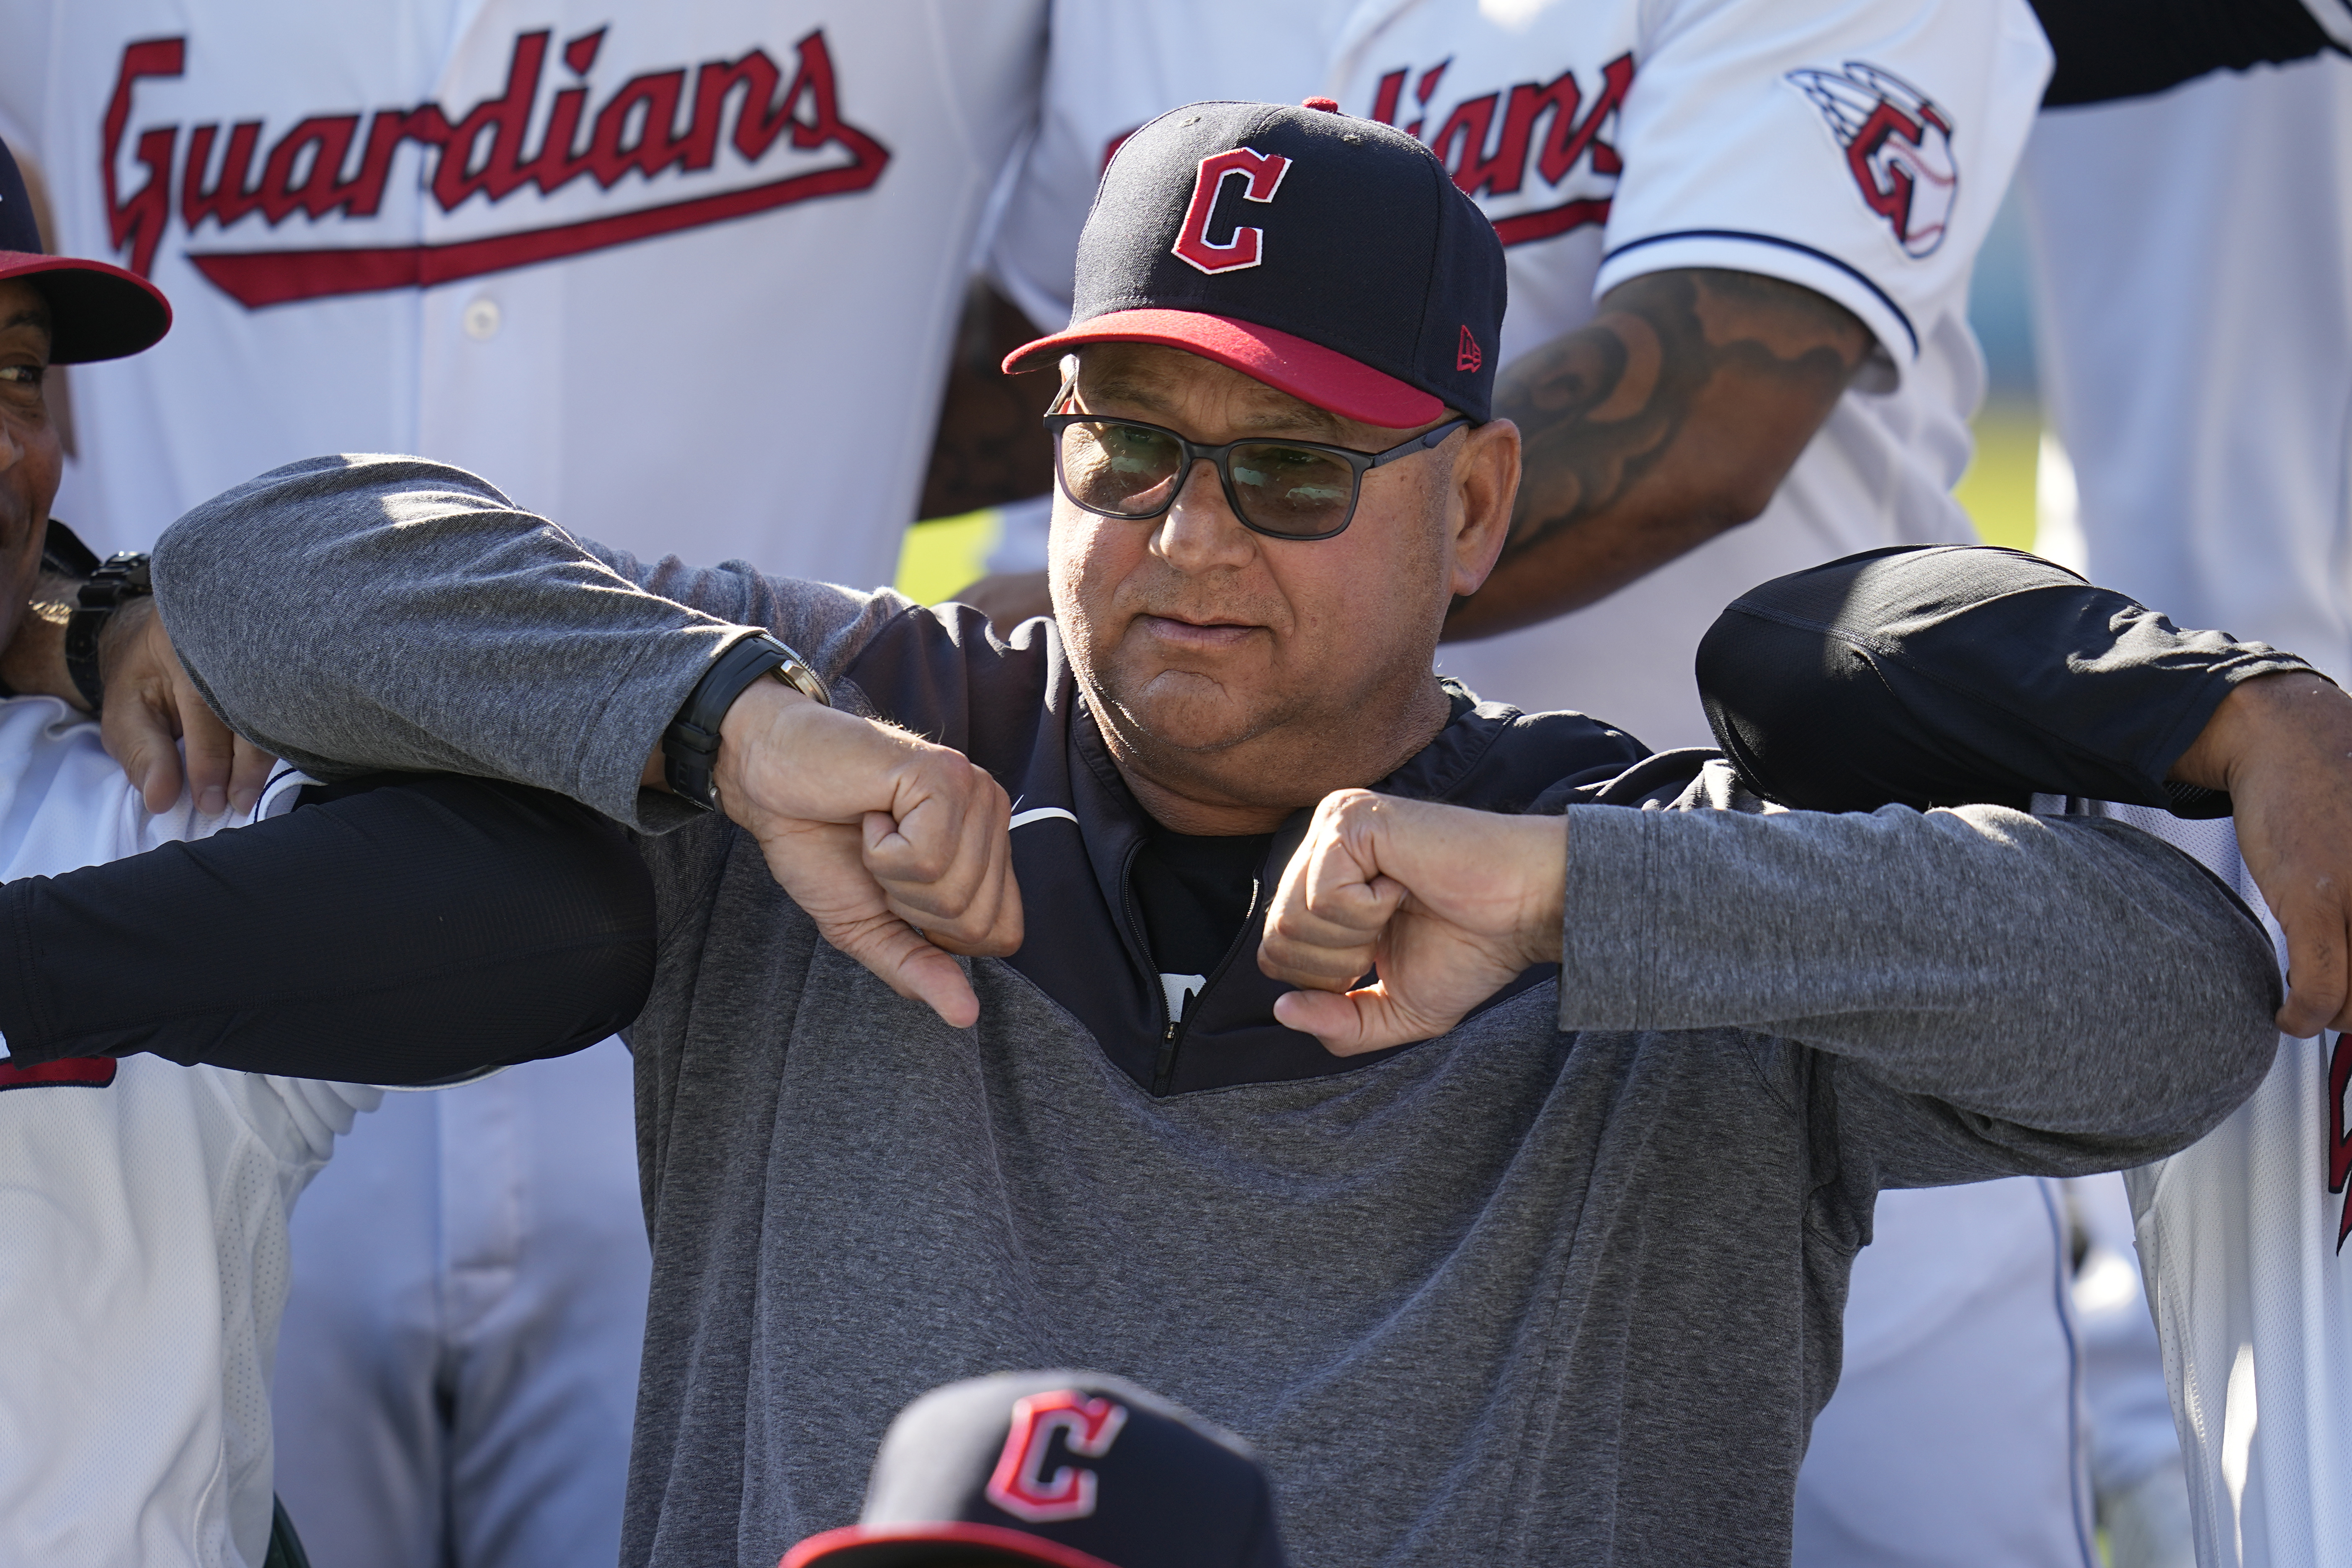 Tito Francona, former All-Star and father of Terry Francona, dead at 84